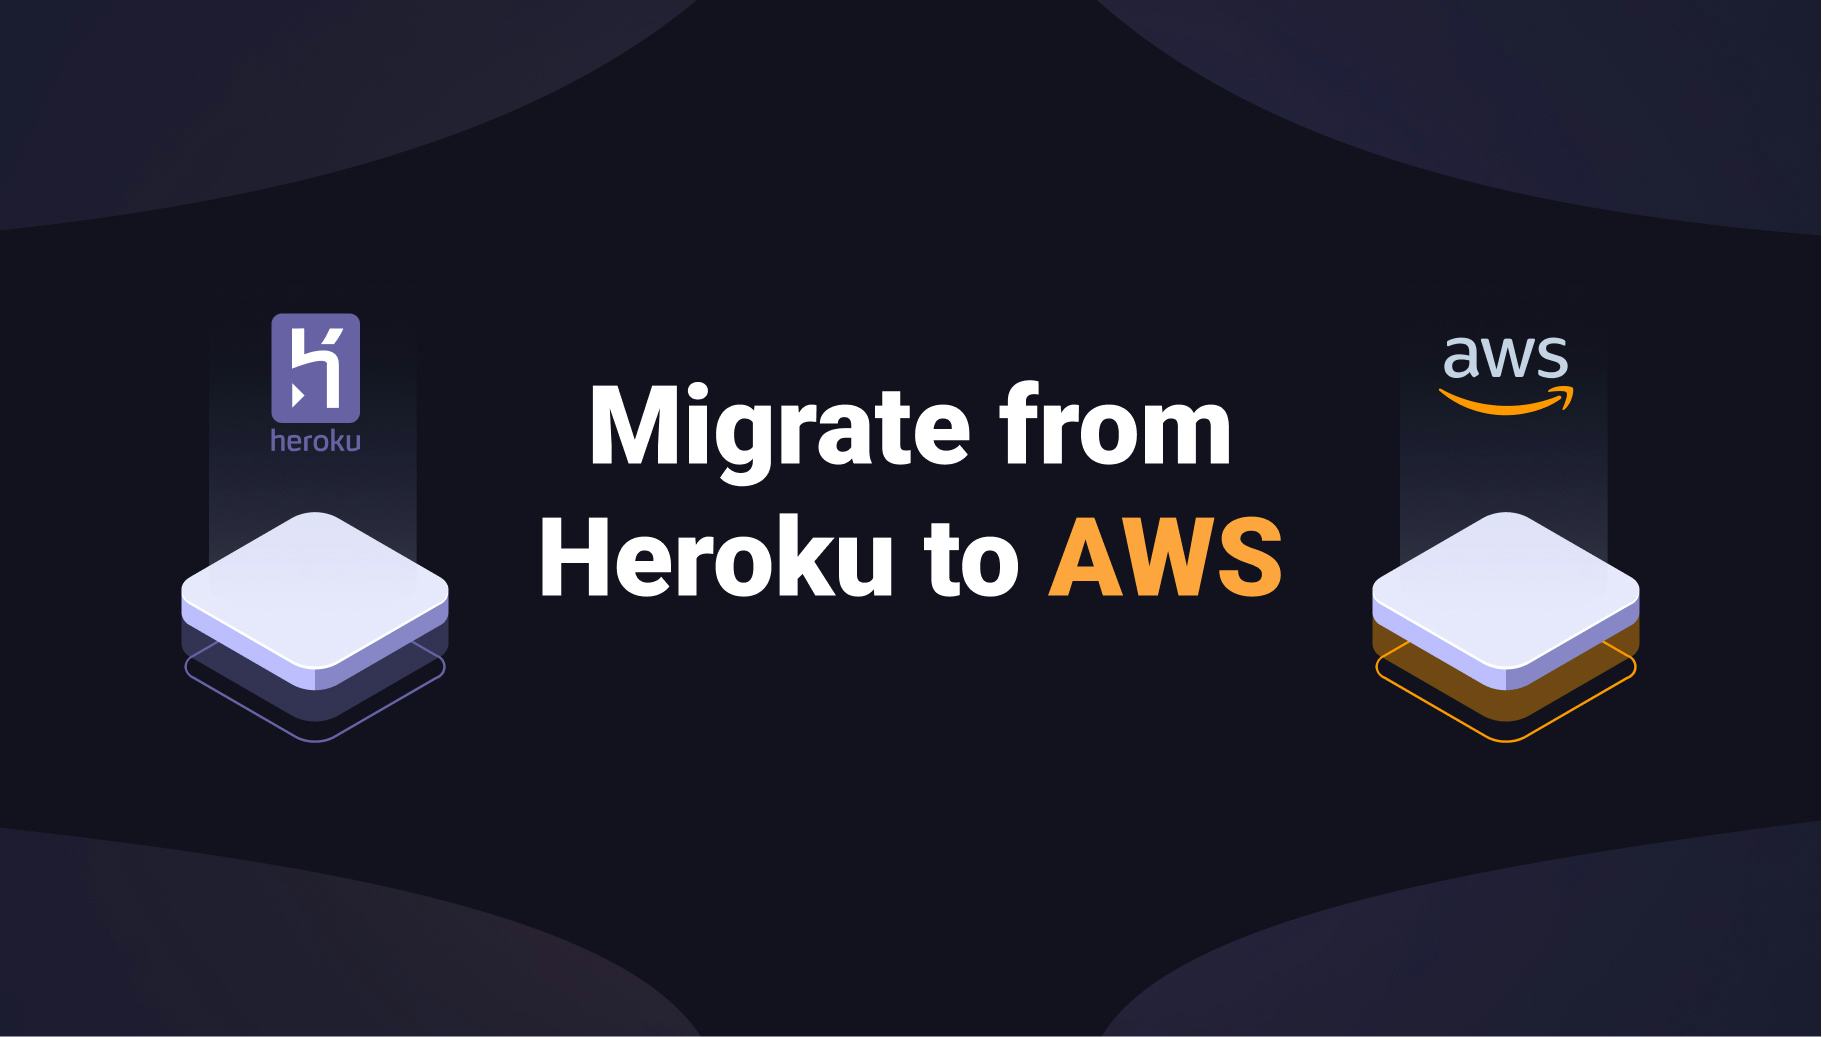 The ultimate guide to migrate from Heroku to AWS